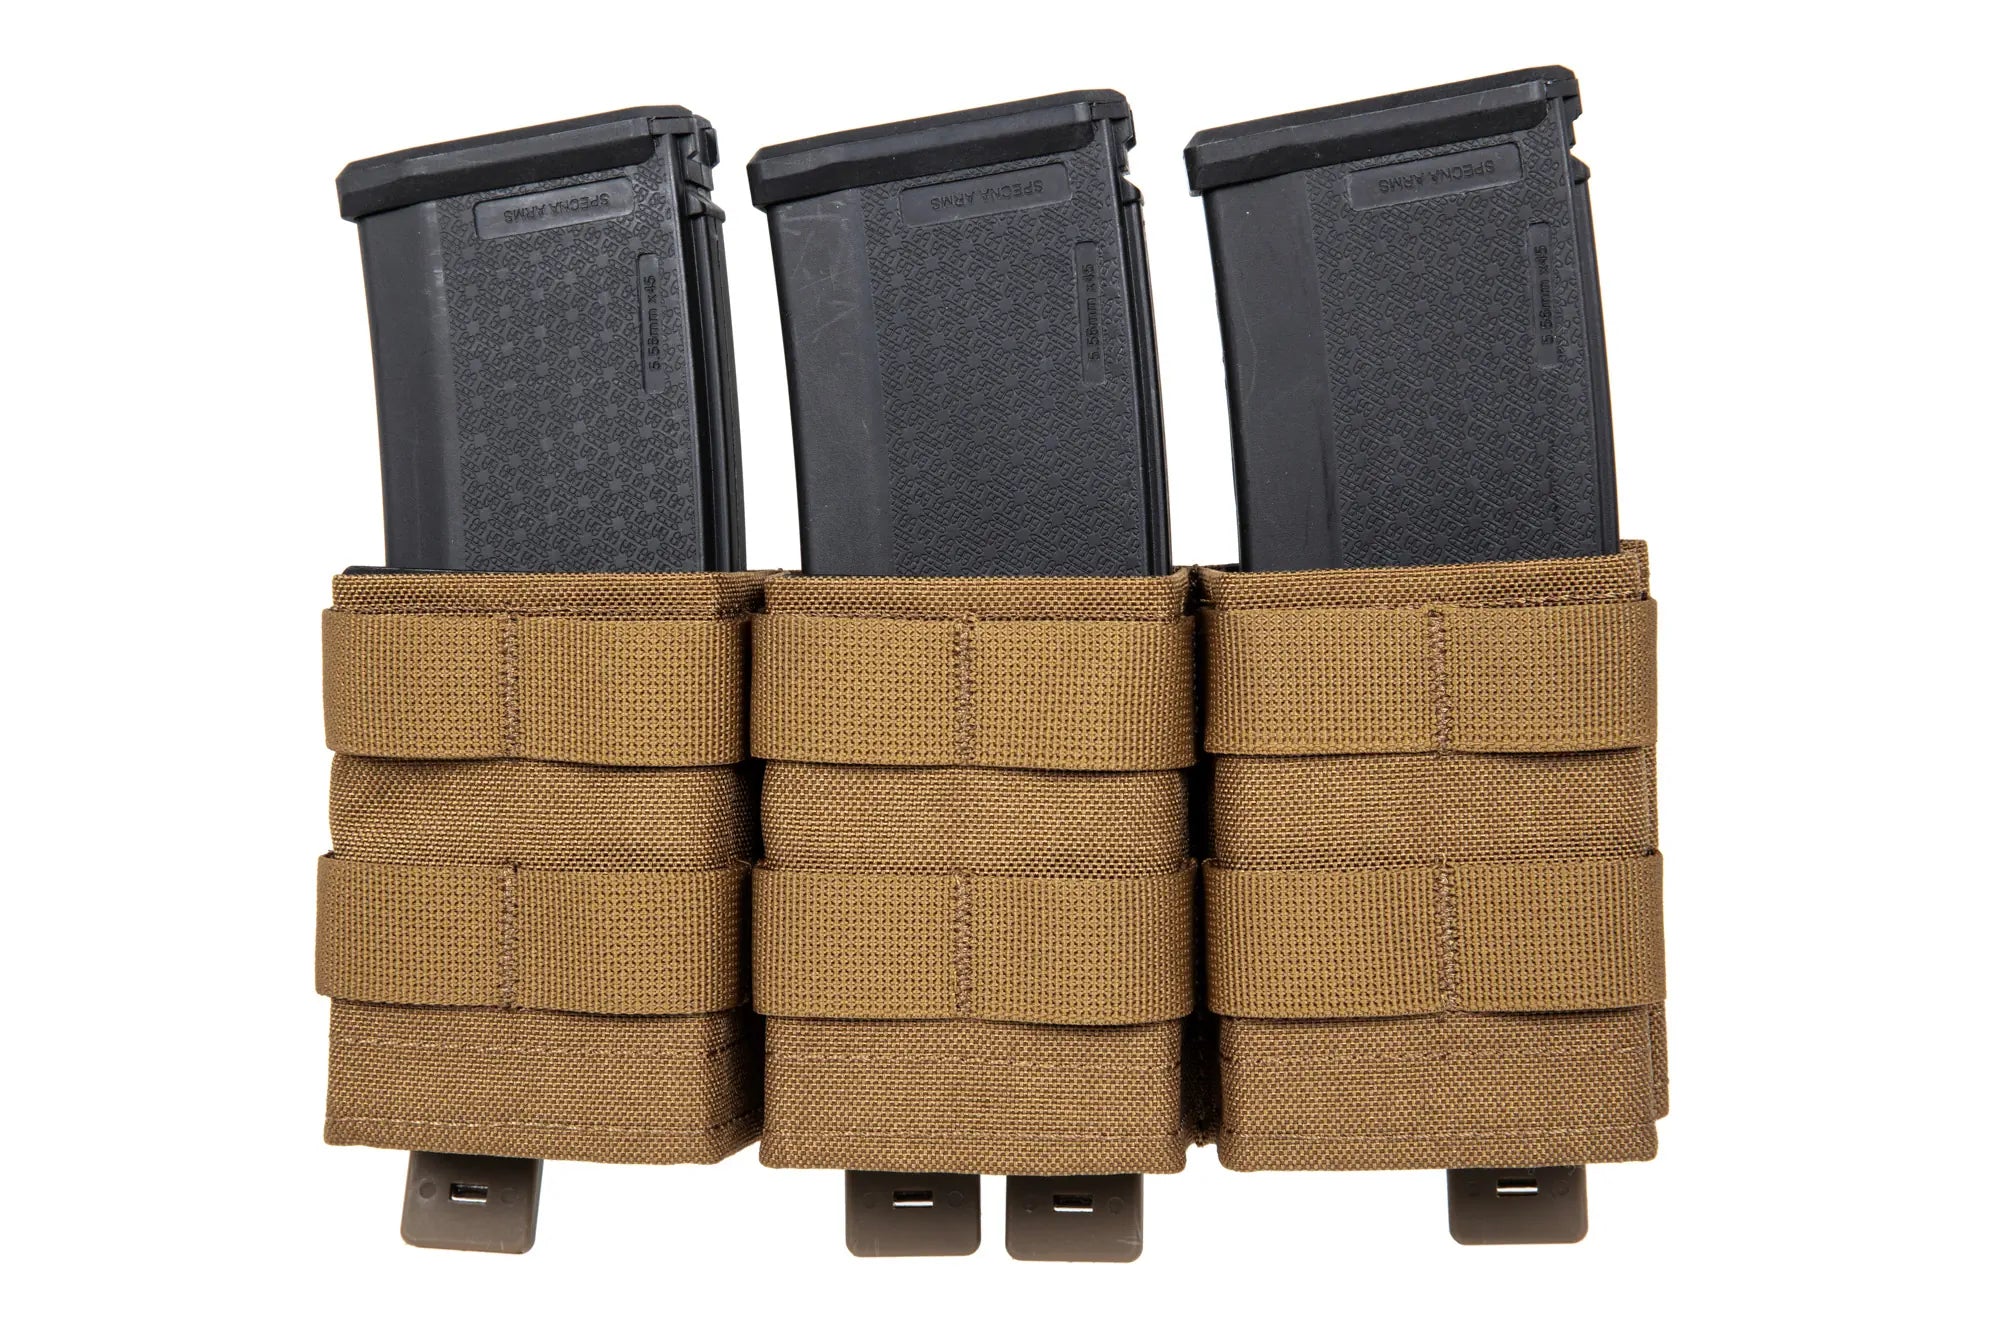 Triple open magazine pouch 7.62 mm Wosport Coyote Brown-1